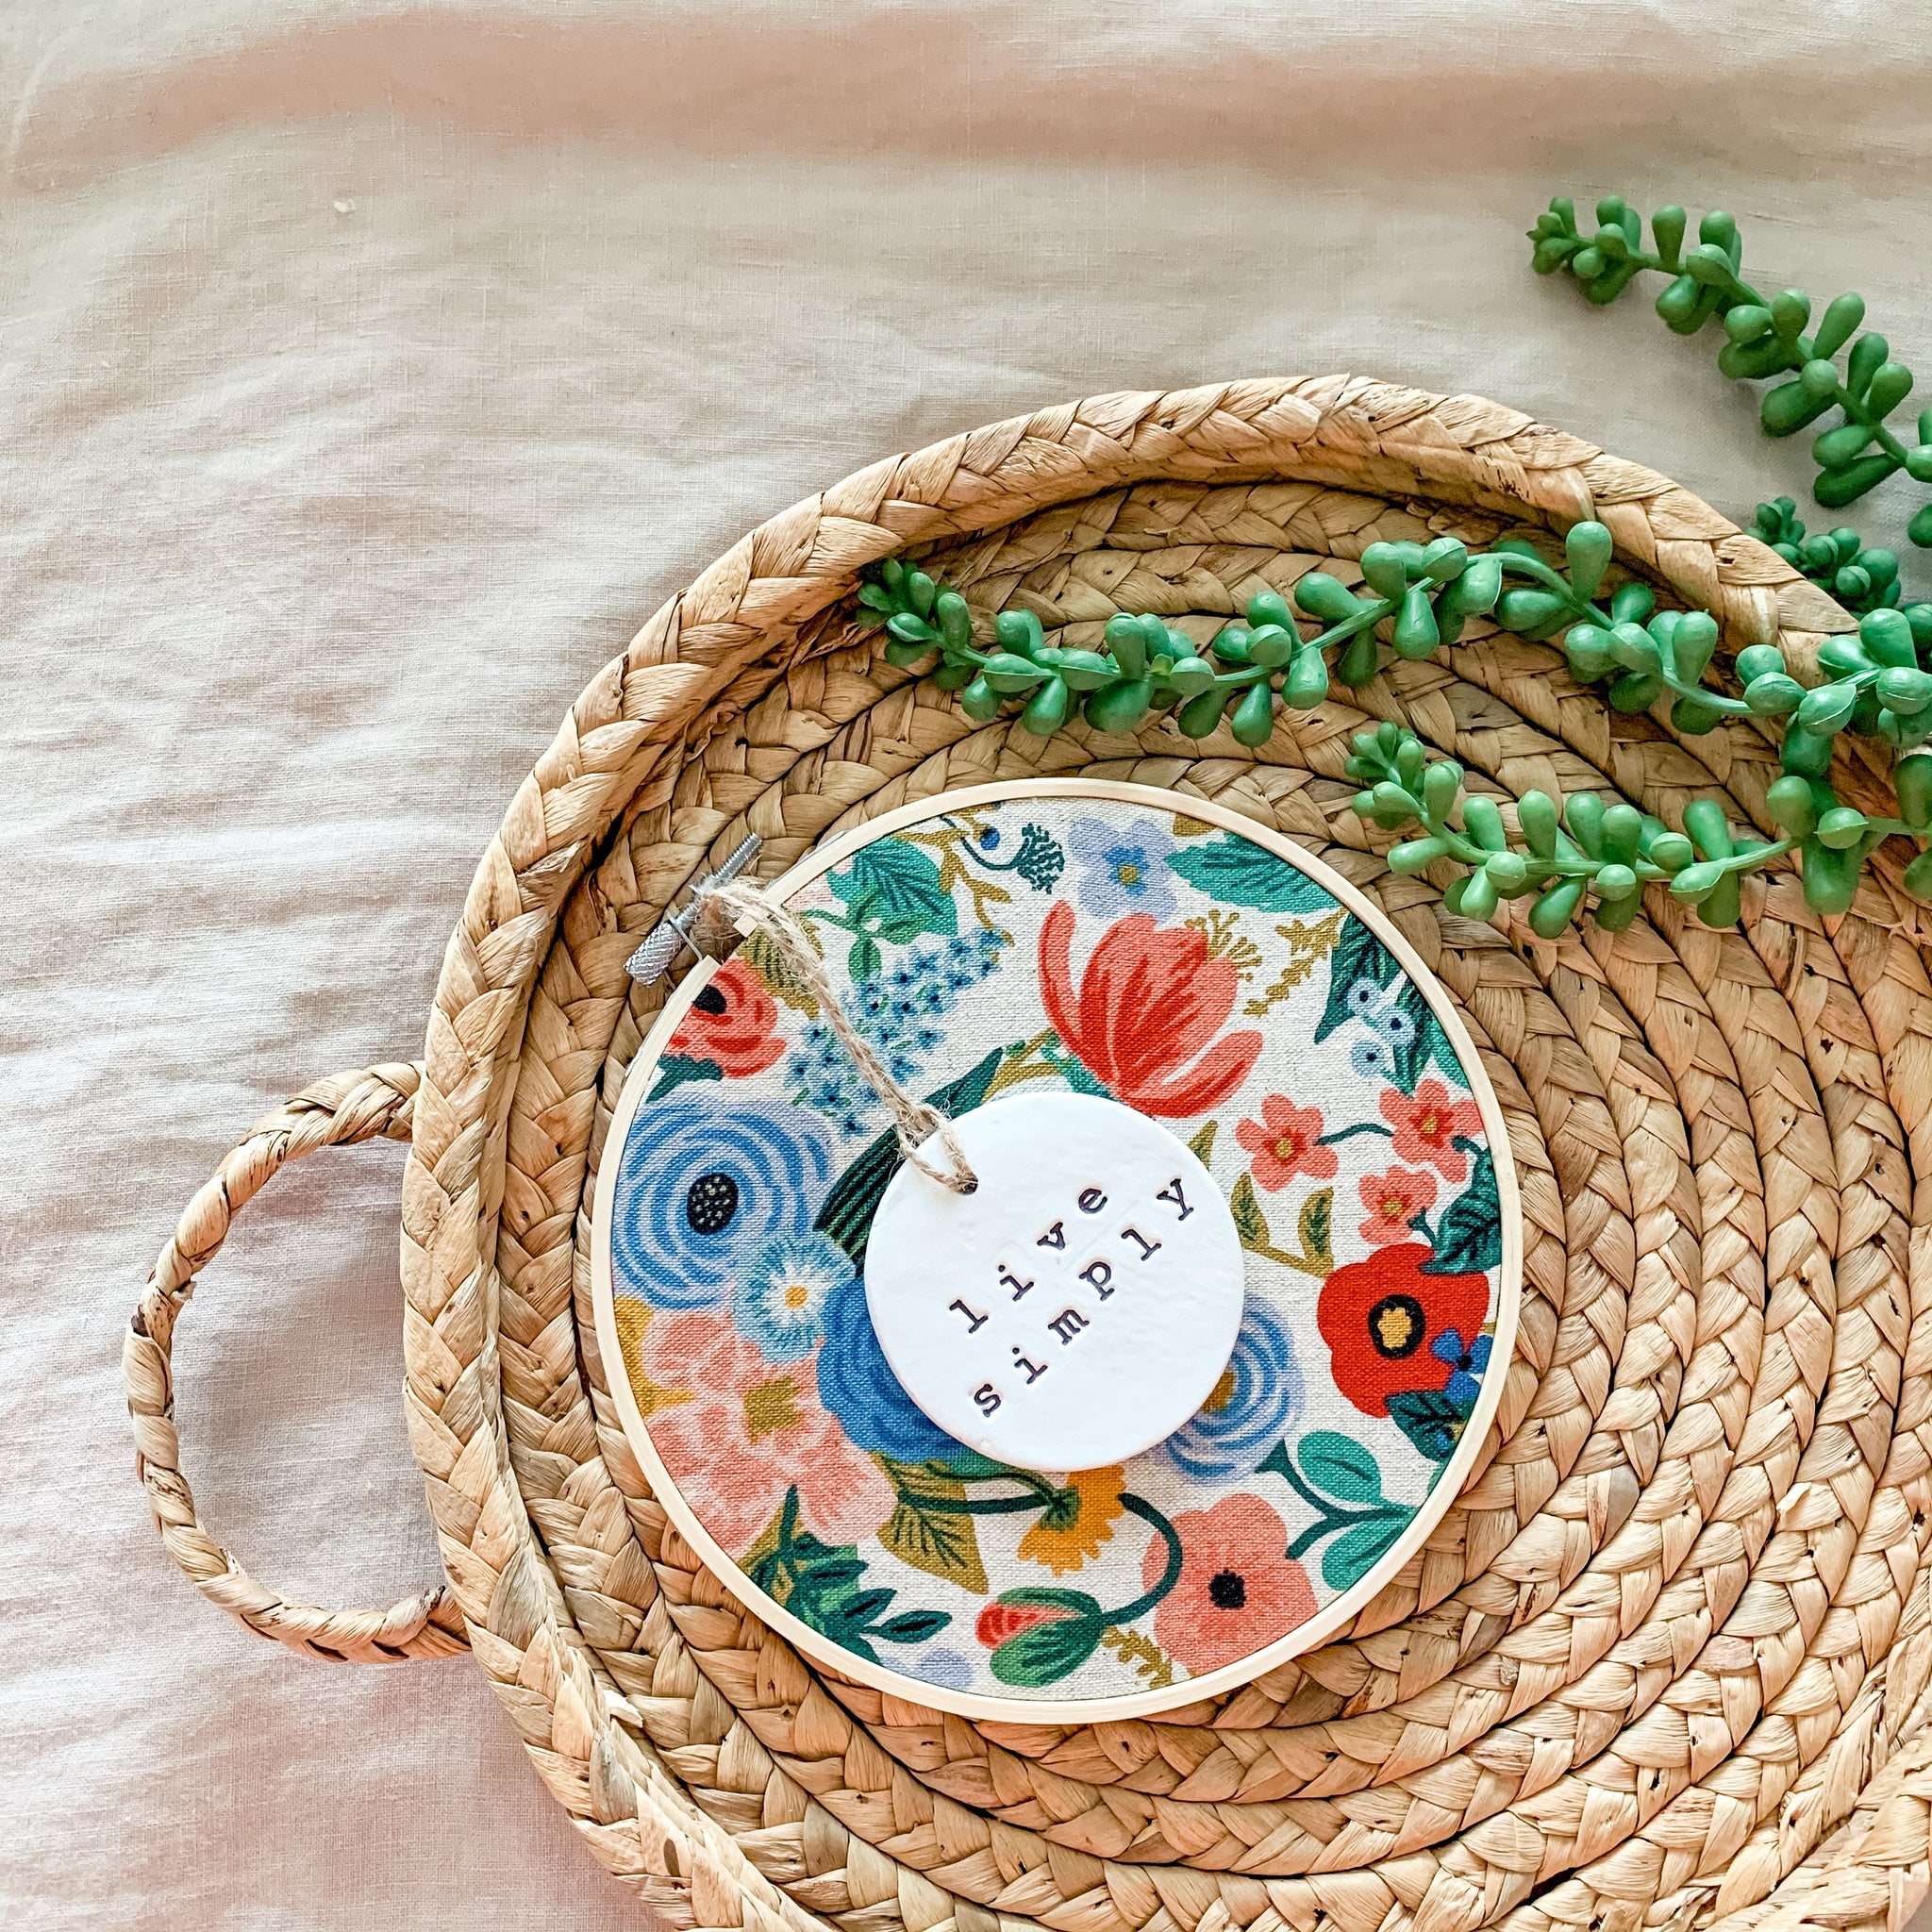 6 Inch Hoop with Rifle Paper Co. Canvas Garden Party Fabric and Circle –  Handmade Hoosier